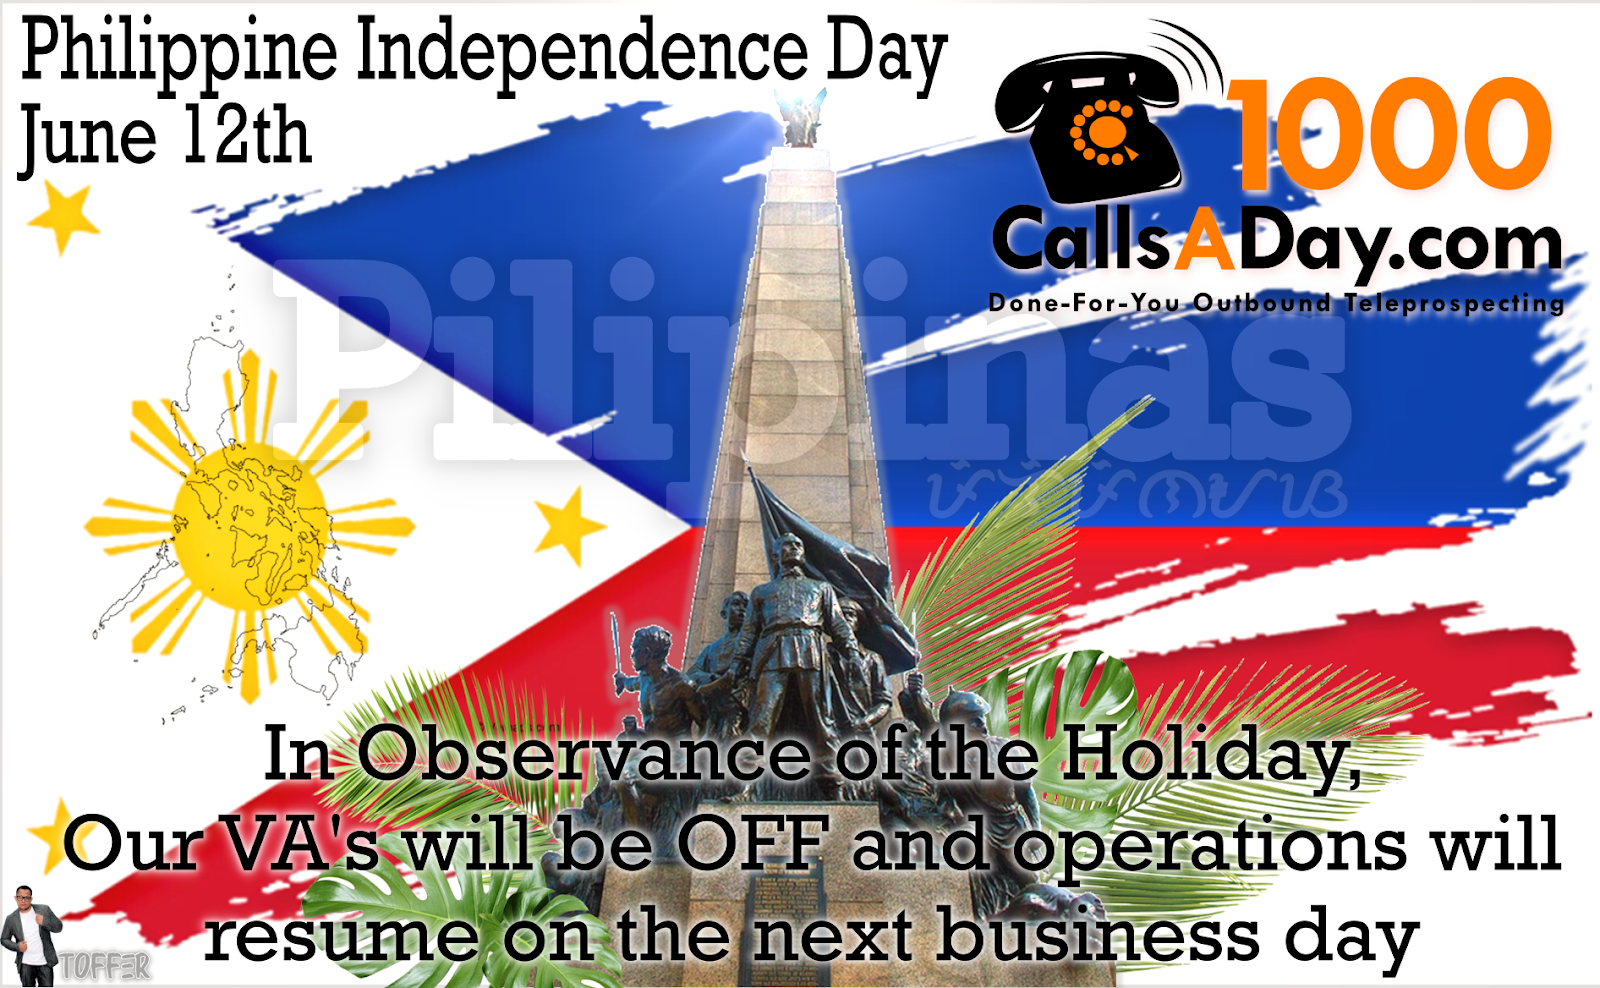 Philippines Independence Day June 12th